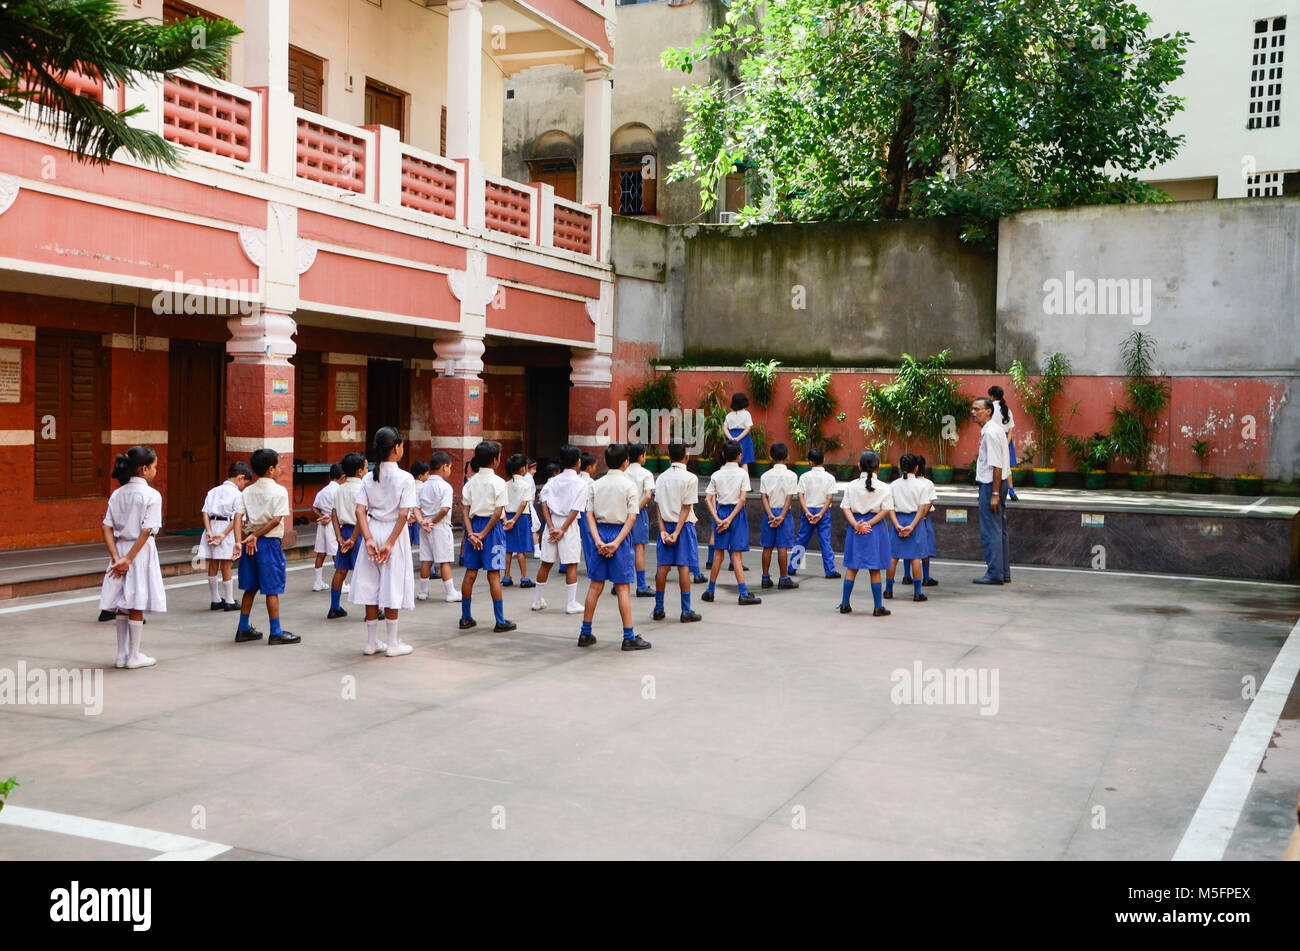 Boys and girls exercise in school compound, Kolkata, West Bengal, India, Asia Stock Photo